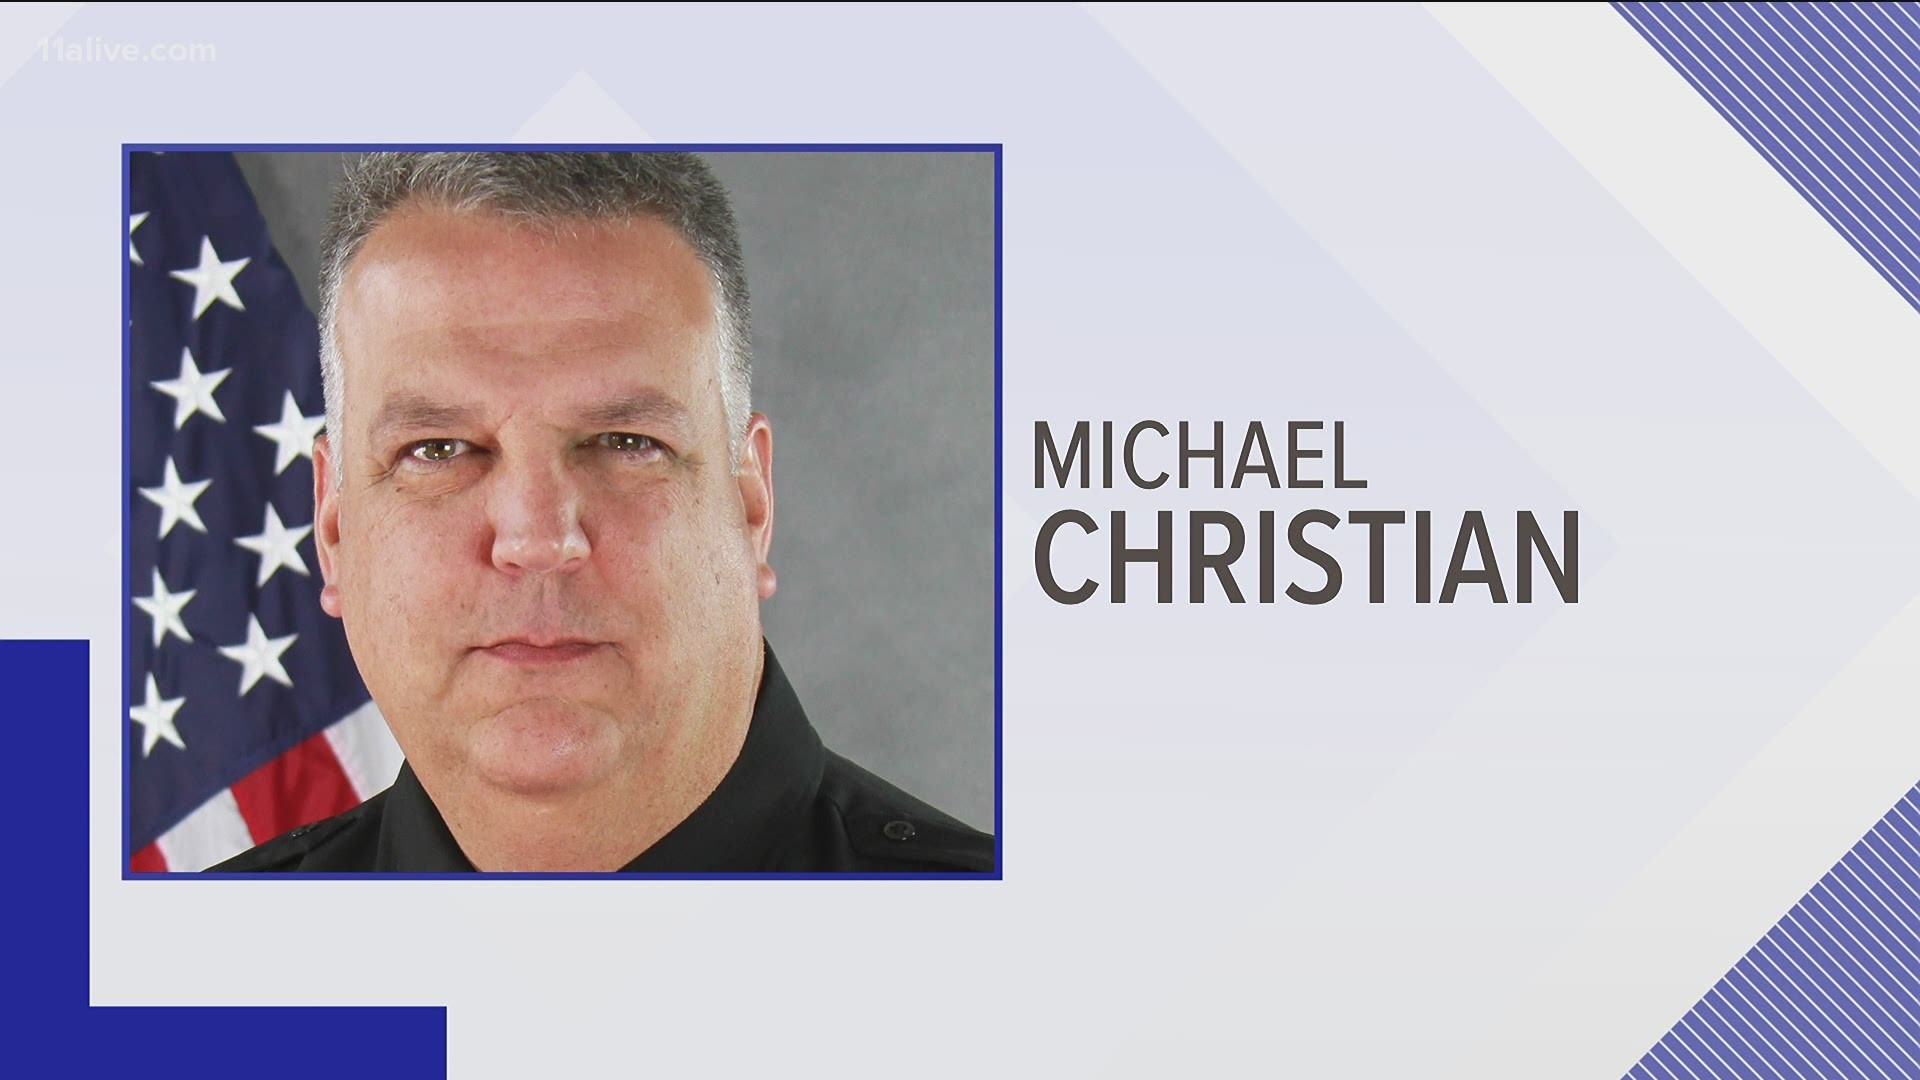 The former deputy was accused of sharing confidential information, having inappropriate contact with two women while on-duty and neglecting his job.